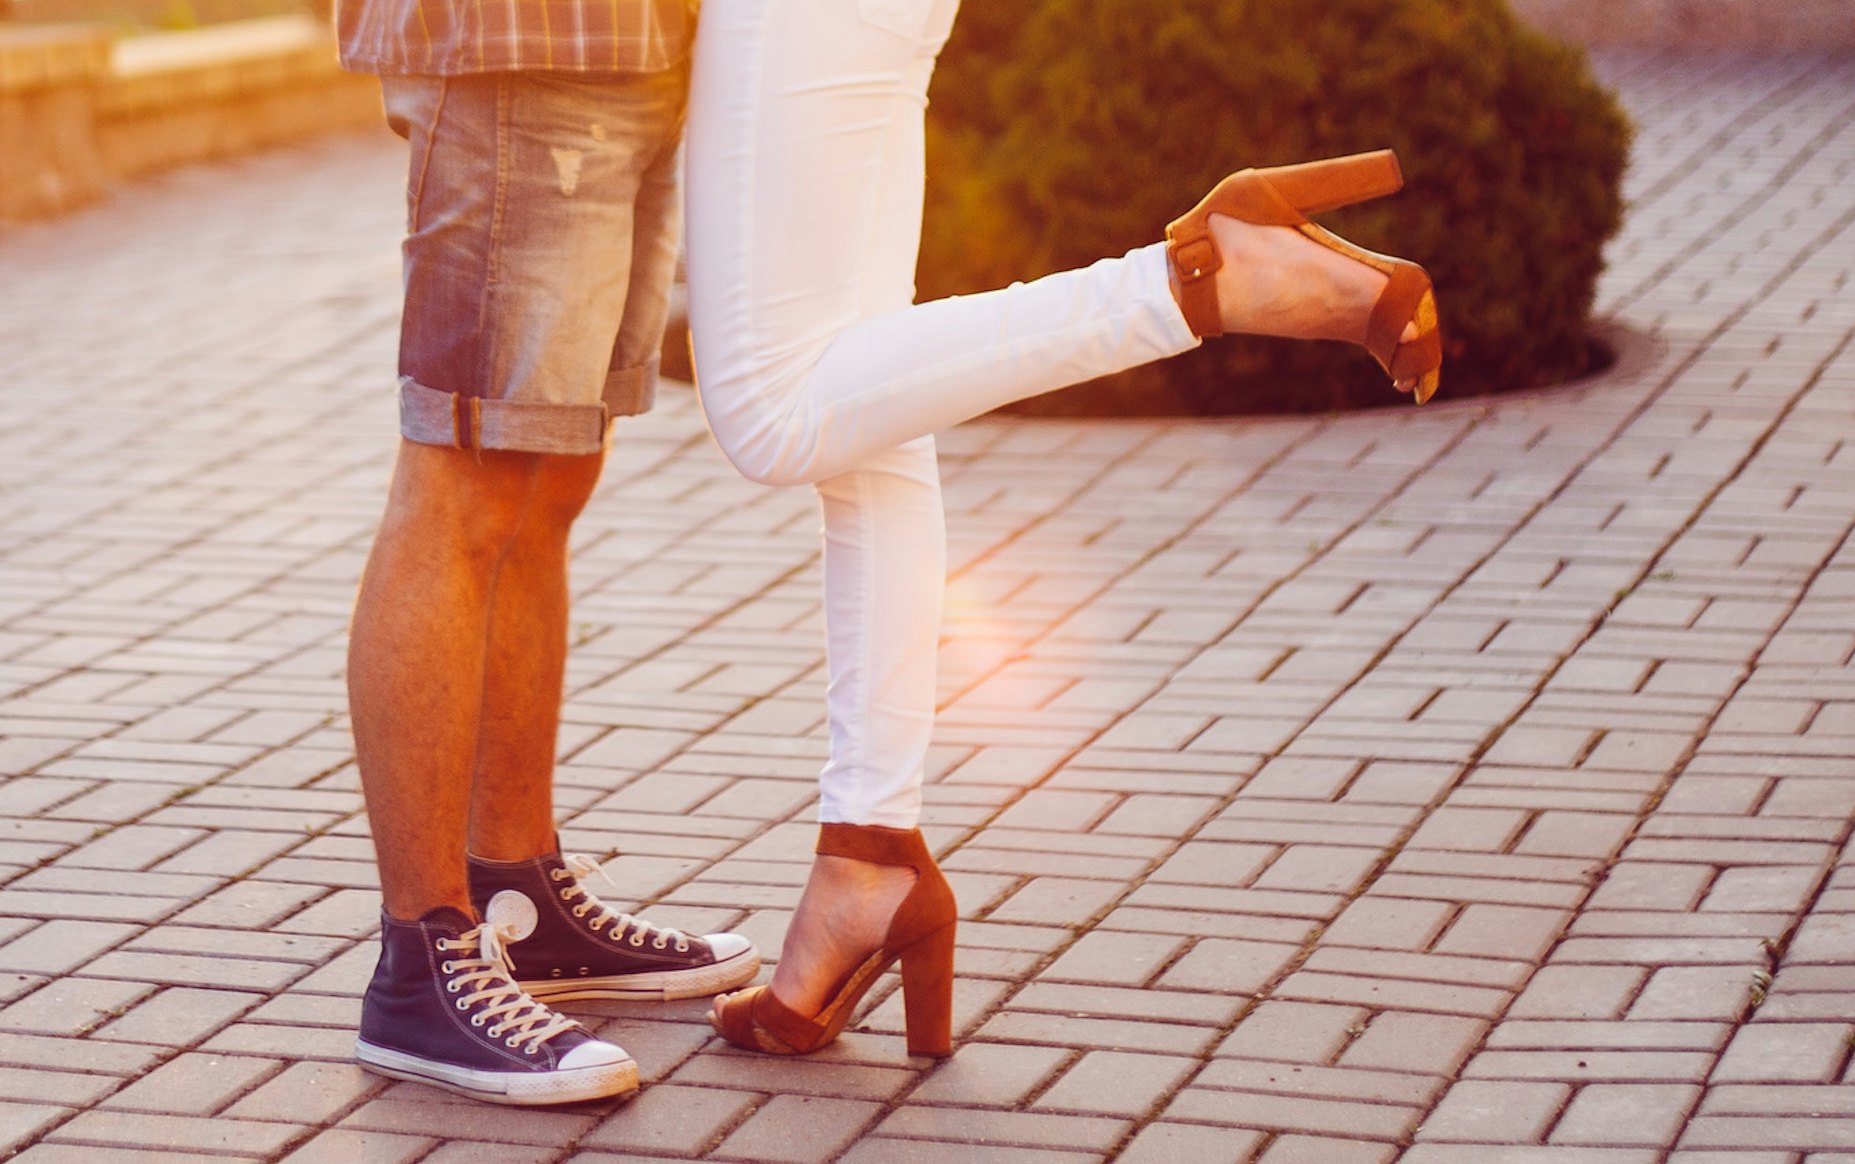 19 Gross Things Couples Do In Secret That Are Even Less Hygienic Than